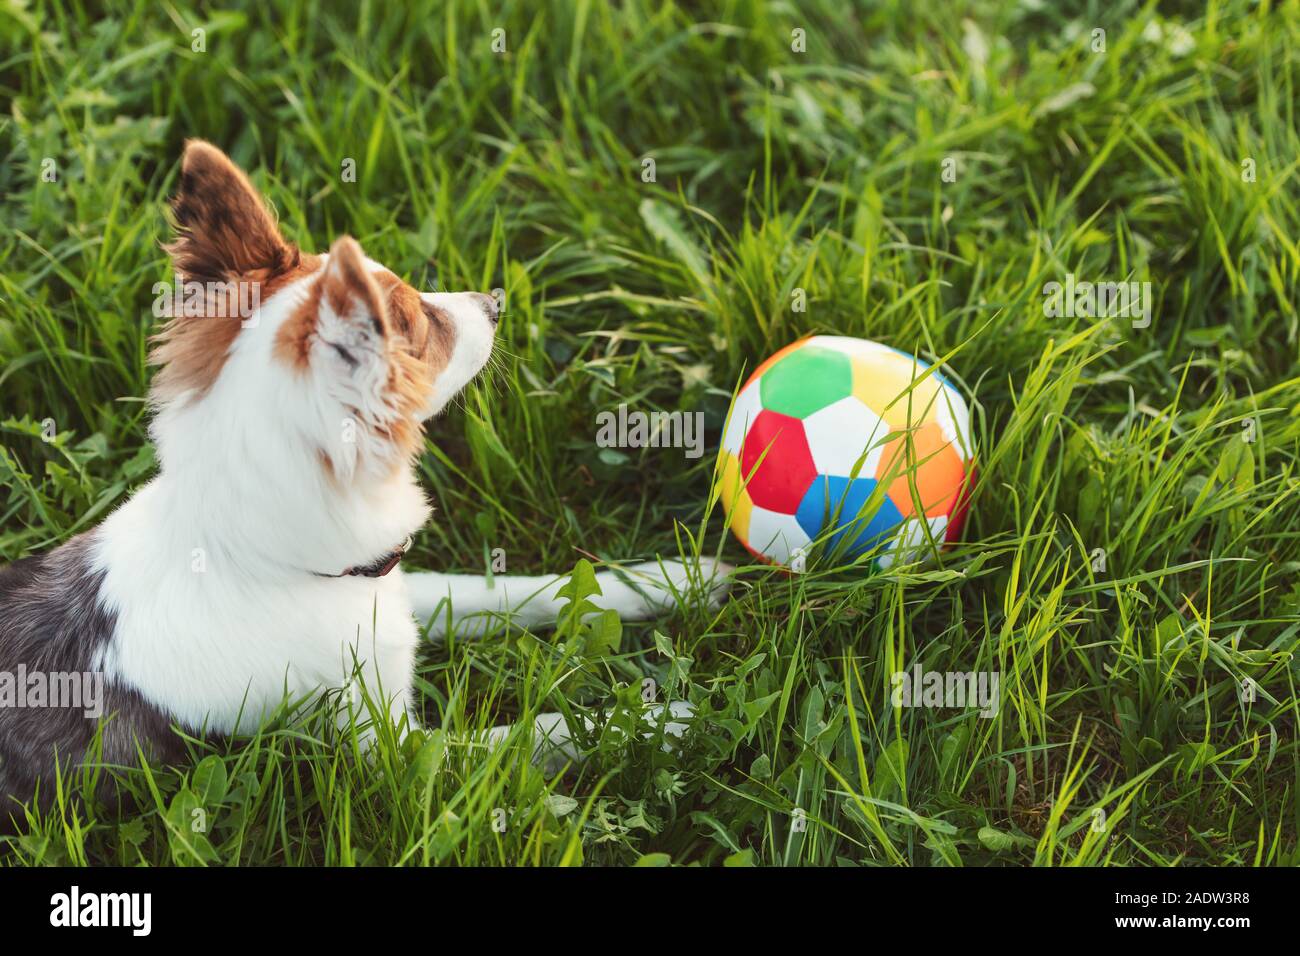 Cute Dog lying on green meadow, football or pet toy ball beside it, outdoor playing Stock Photo